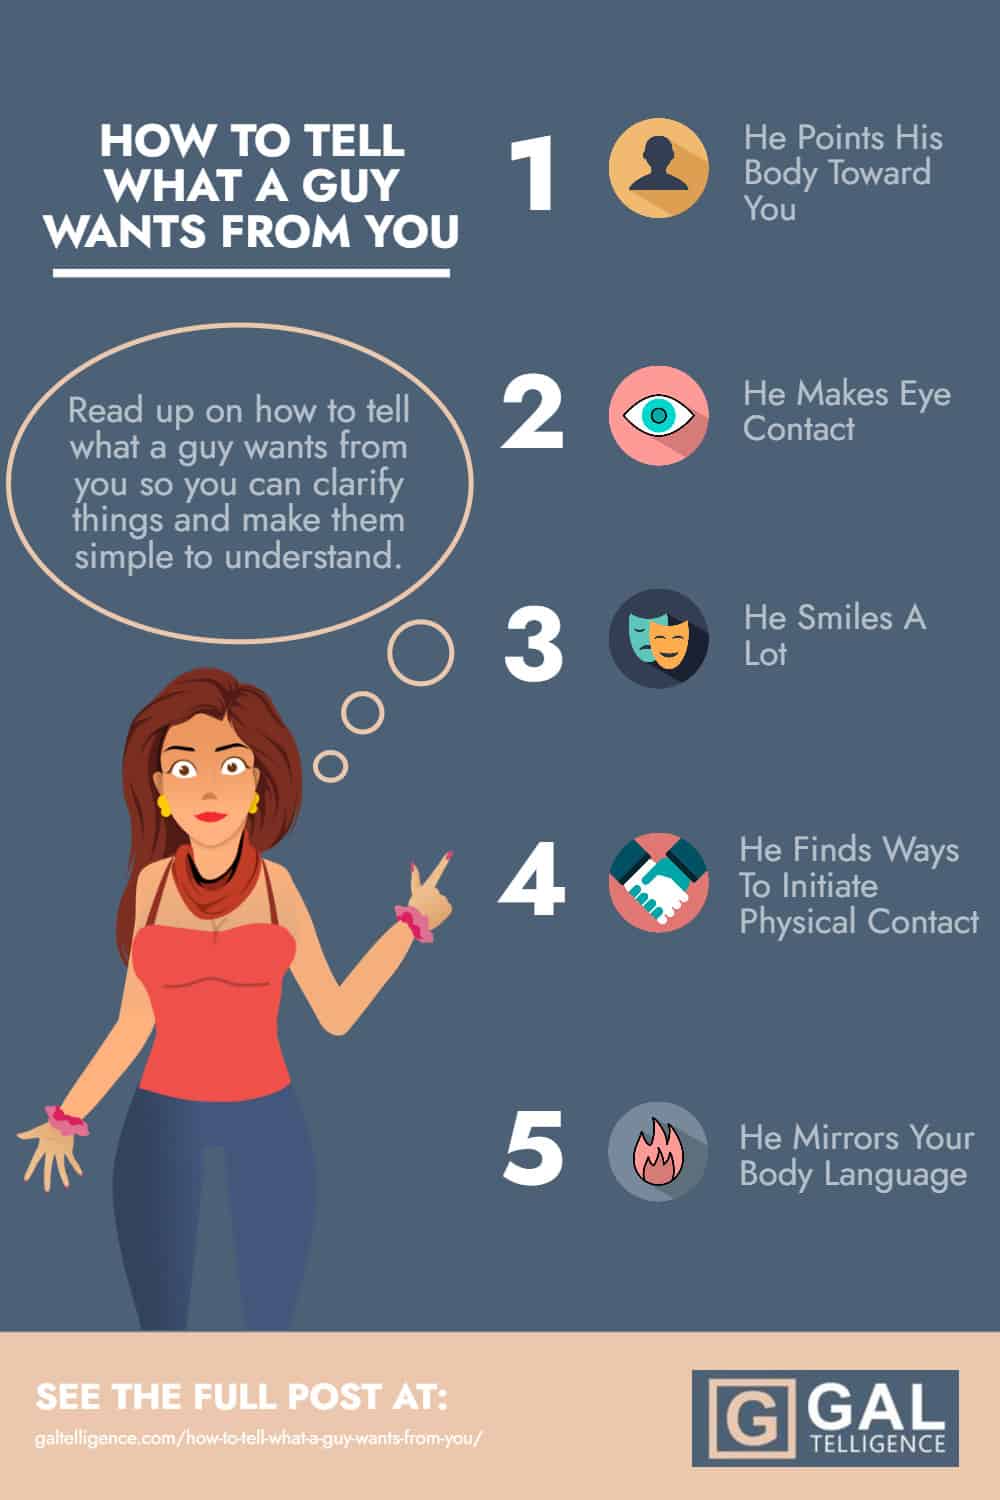 How to tell what a guy wants from you - Infographic